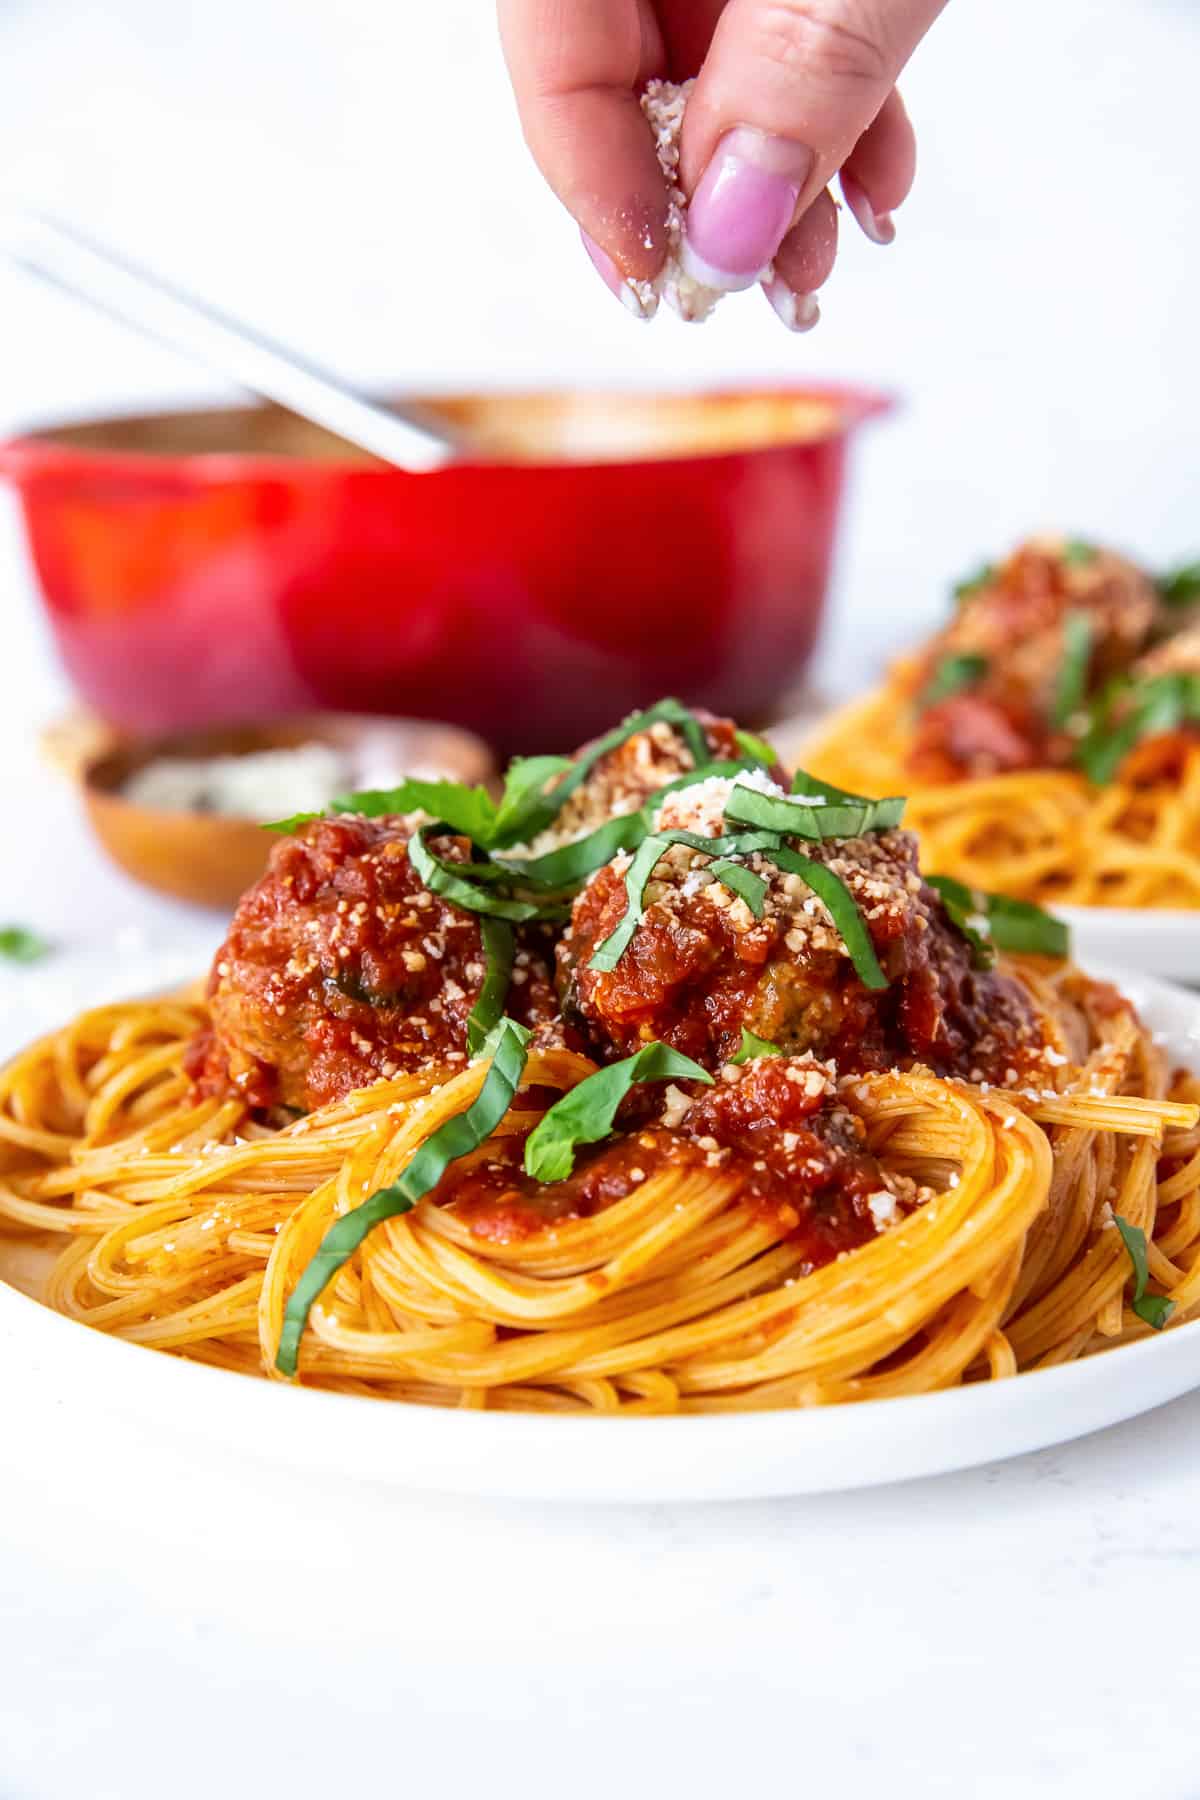 Fingers sprinkling Parmesan cheese on a plate of spaghetti and meatballs.